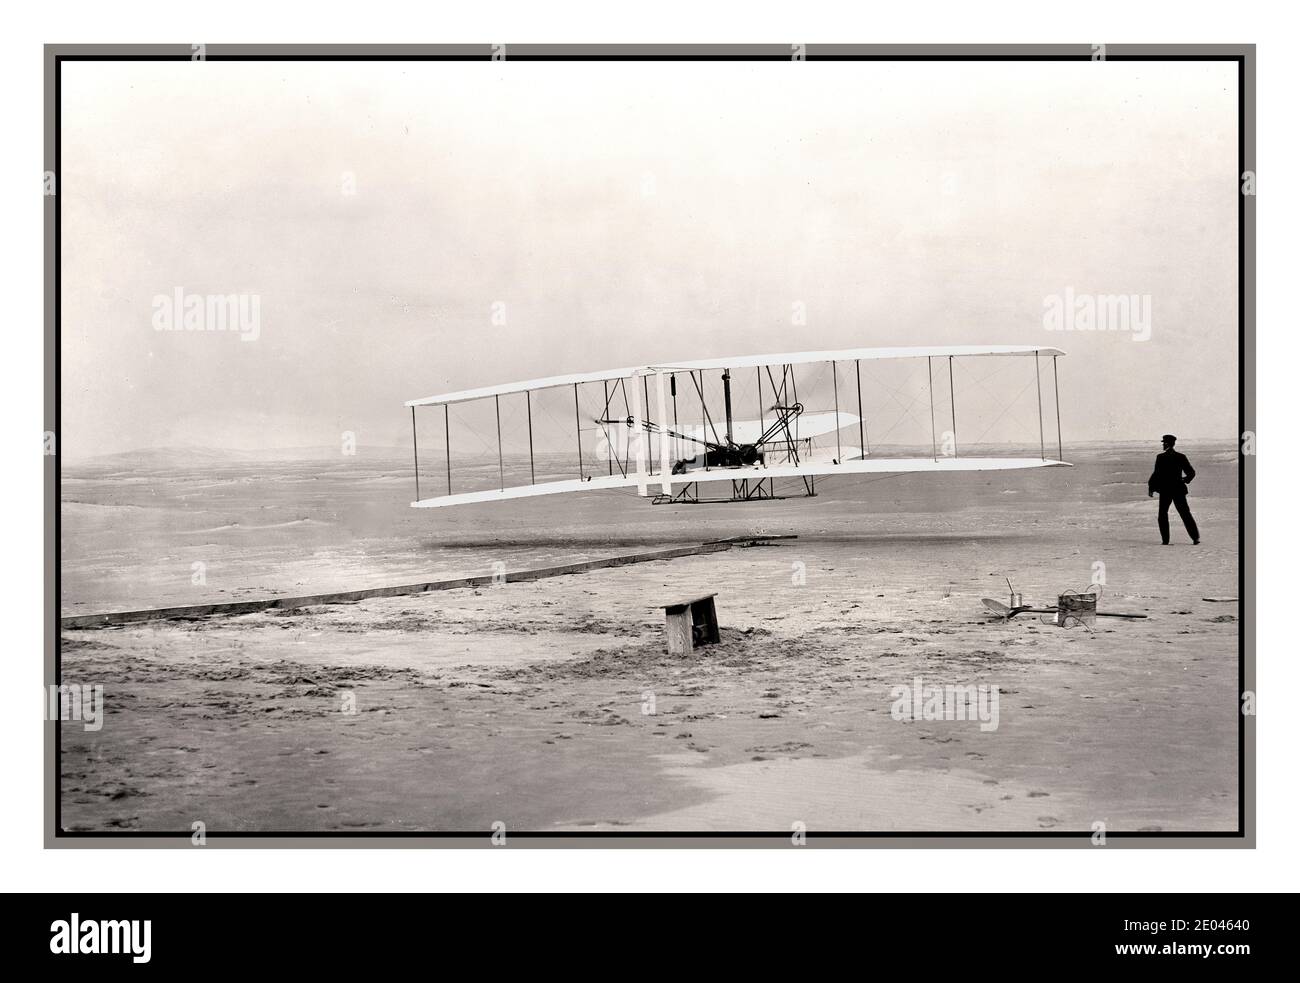 WRIGHT BROTHERS Archive FIRST POWERED FLIGHT Wright Brothers make first powered flight 1903 Kitty Hawk, North Carolina, USA America Photograph shows the first powered, controlled, sustained flight. Orville Wright at the controls of the machine, lying prone on the lower wing with hips in the cradle which operated the wing-warping mechanism. Wilbur Wright running alongside to balance the machine, has just released his hold on the forward upright of the right wing. The starting rail, the wing-rest, a coil box, and other items needed for flight preparation are visible behind the machine. Stock Photo